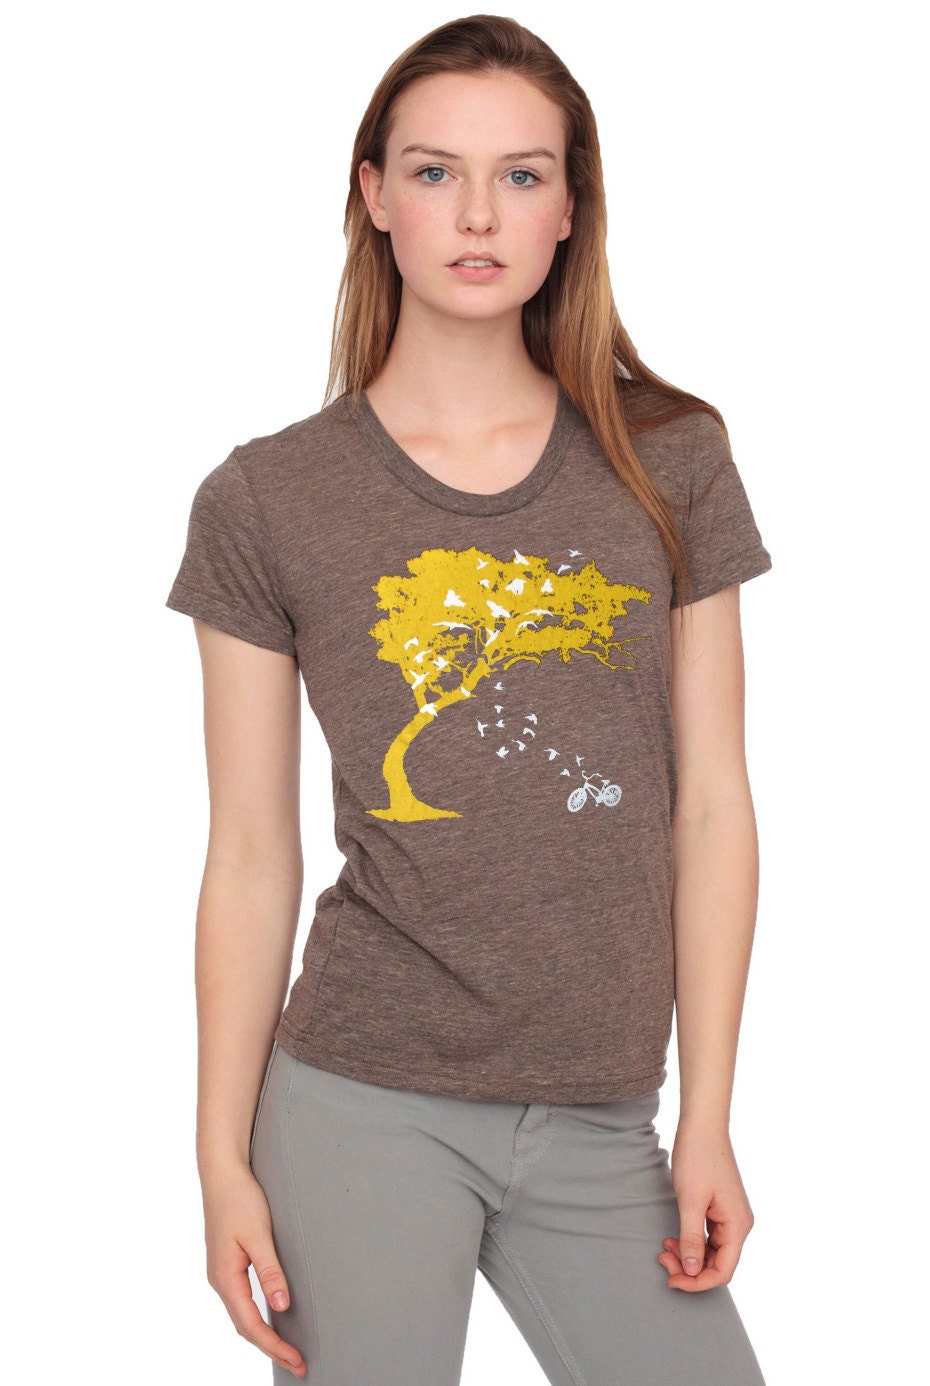 birds bicycle and tree- women's scoop track t shirt american apparel- coffee brown- available in S, M, L WorldWide Shipping